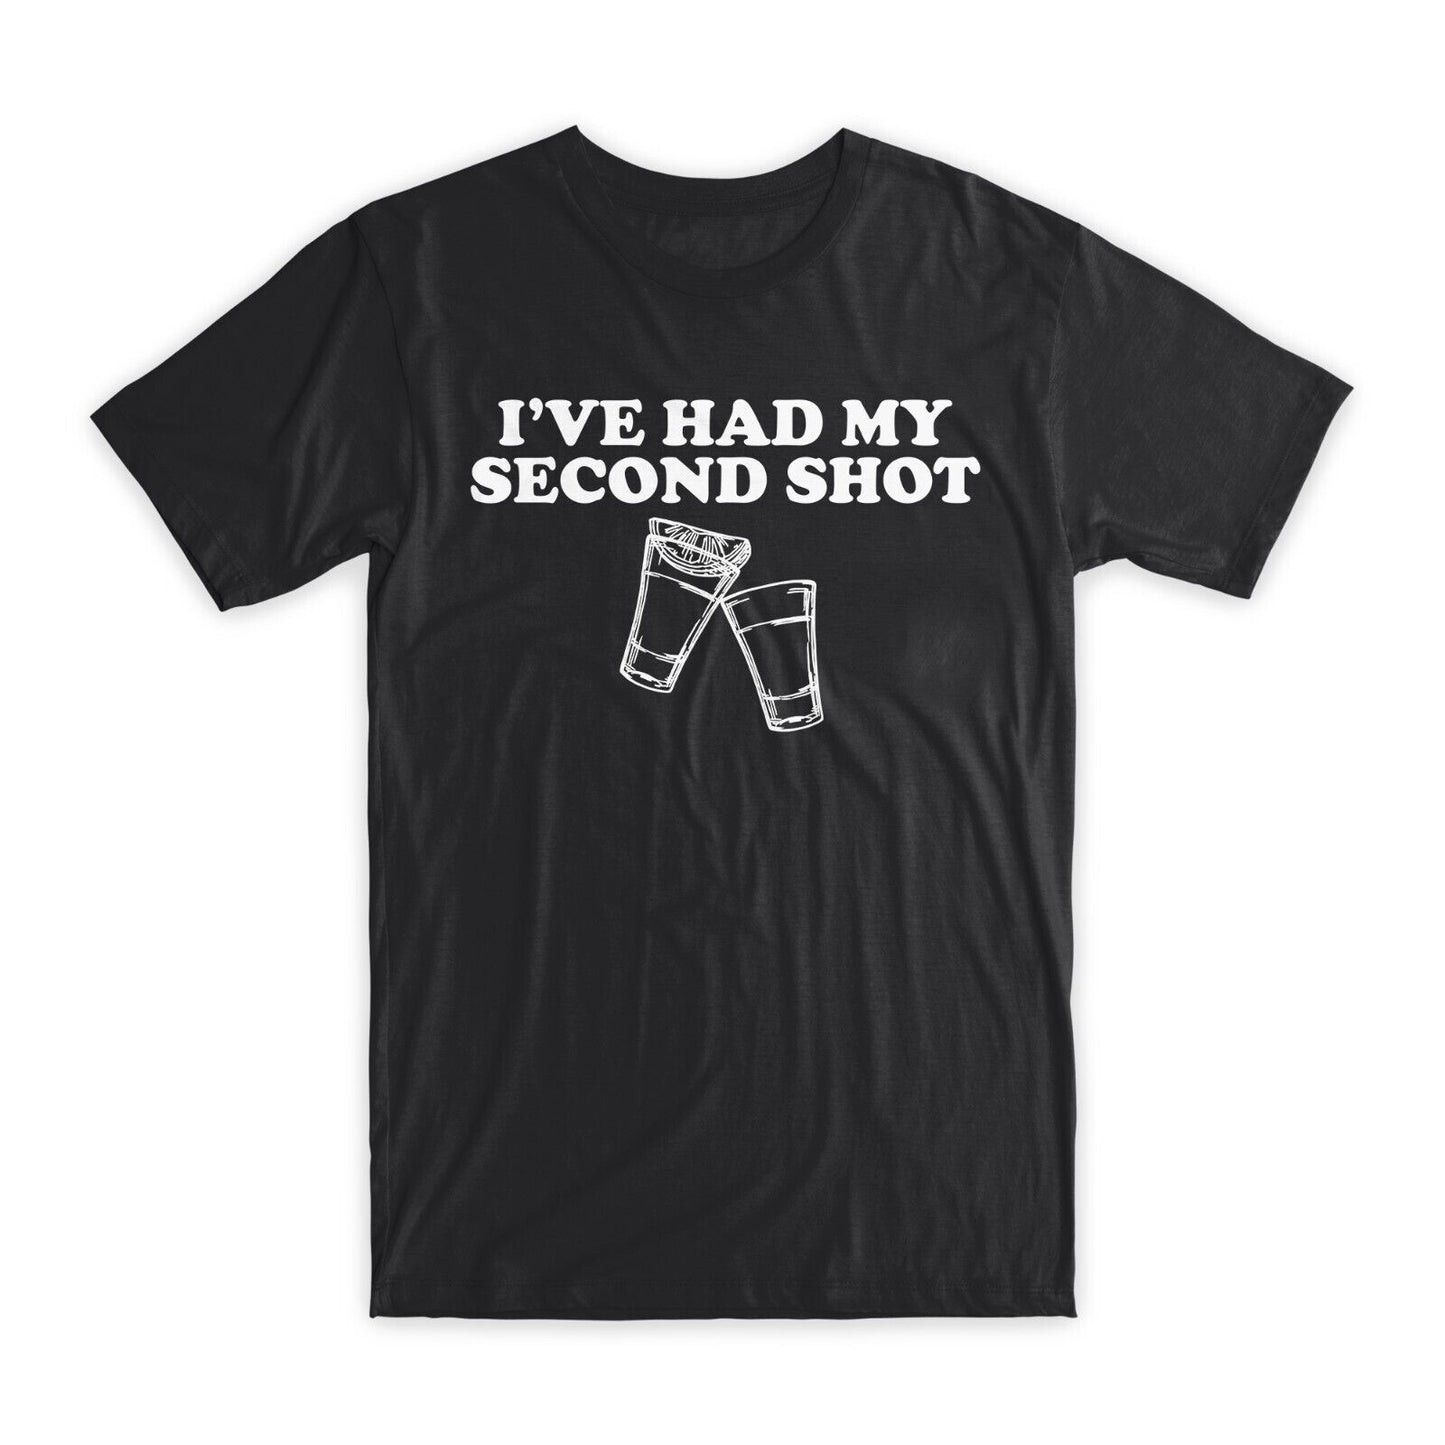 I've Had My Second Shot T-Shirt Premium Soft Cotton Crew Neck Funny Tee Gift NEW